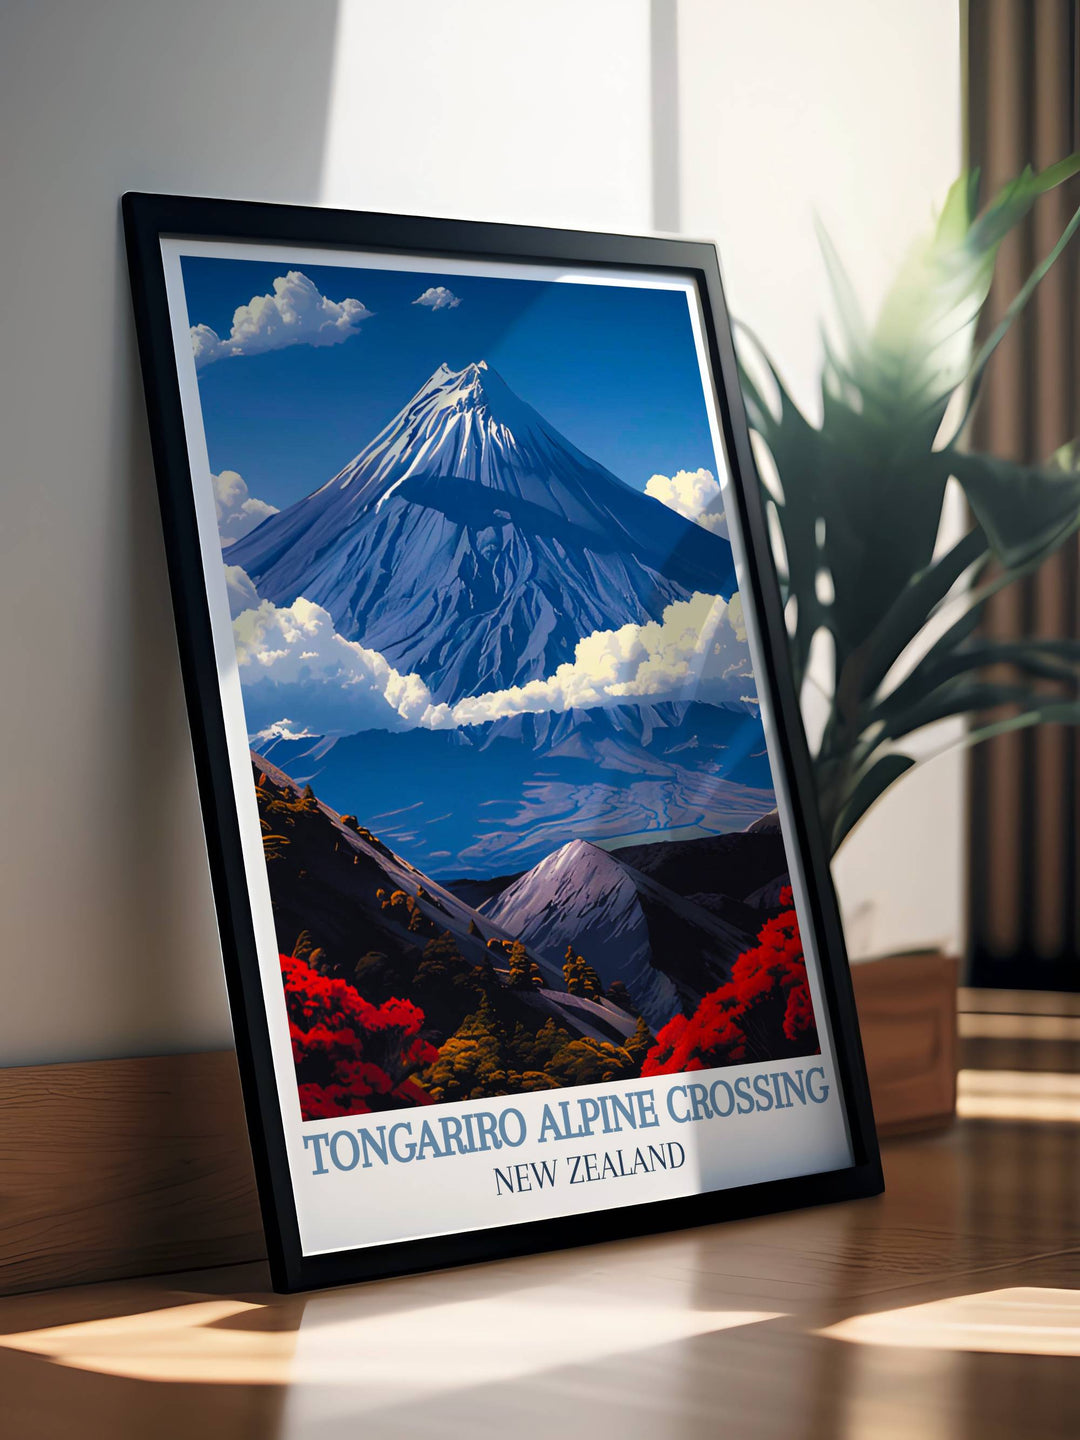 Mount Ngauruhoe custom prints allowing you to bring a piece of New Zealands beauty into your home with personalized options that reflect your love for its landscapes.